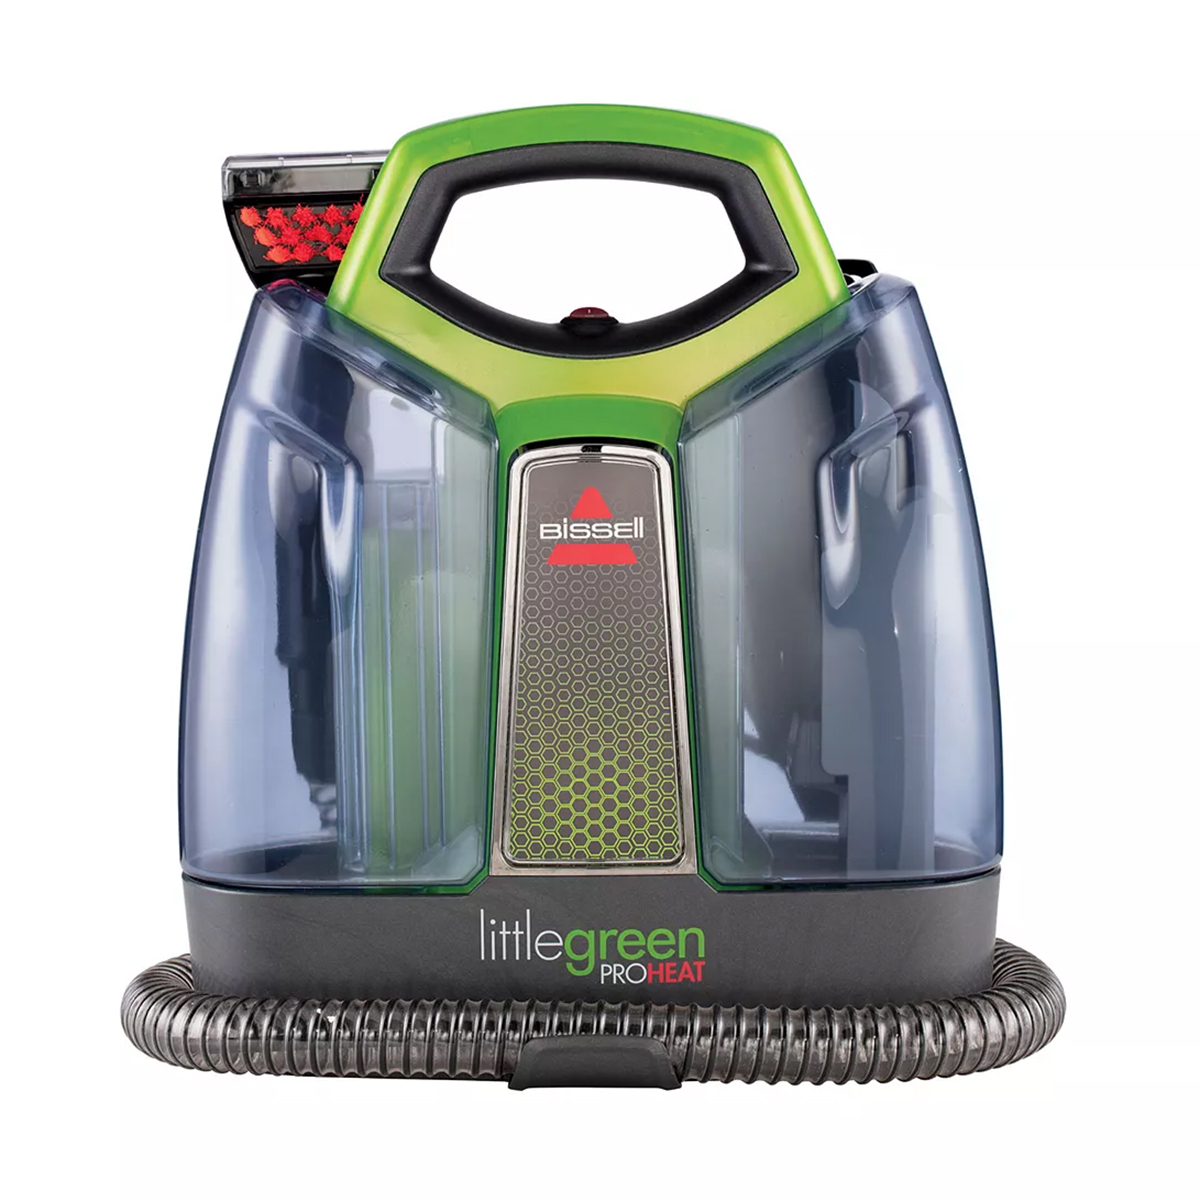 Bissell(R) Little Green Proheat Portable Cleaner